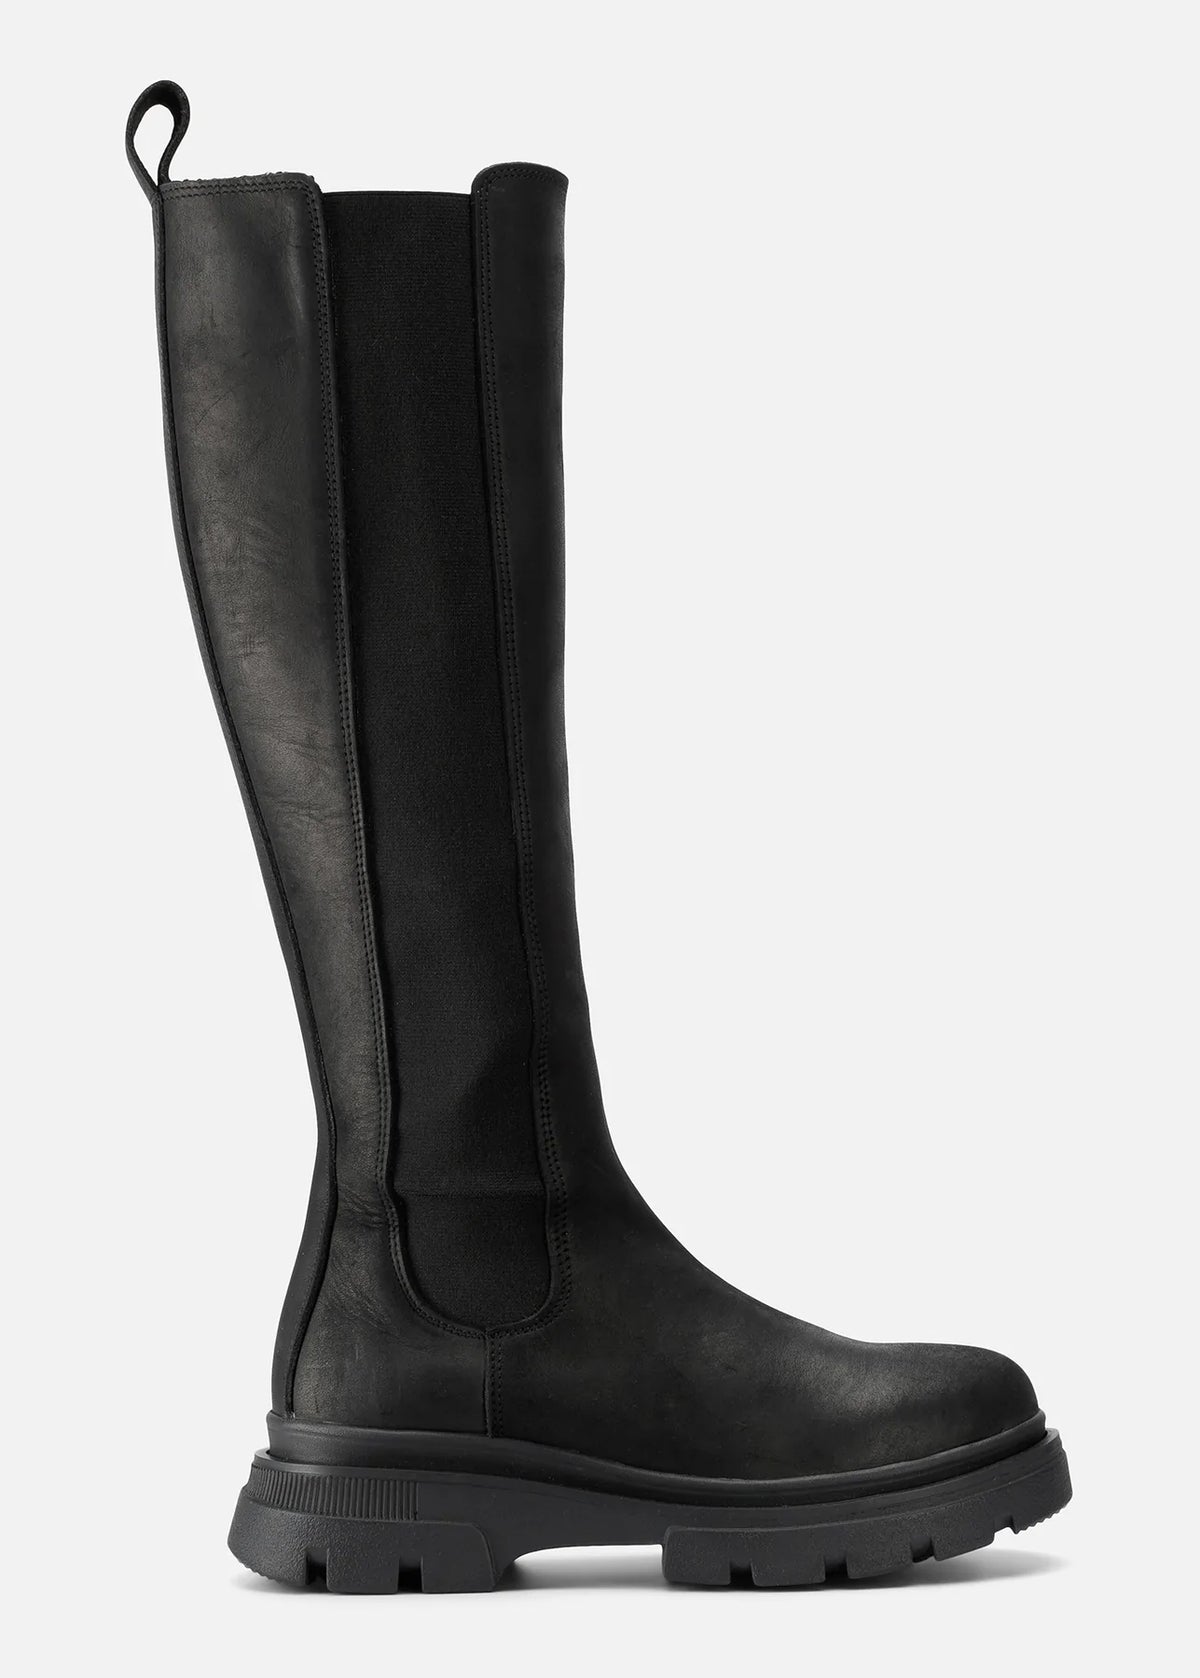 Black long waterproof boots with elastic side panels